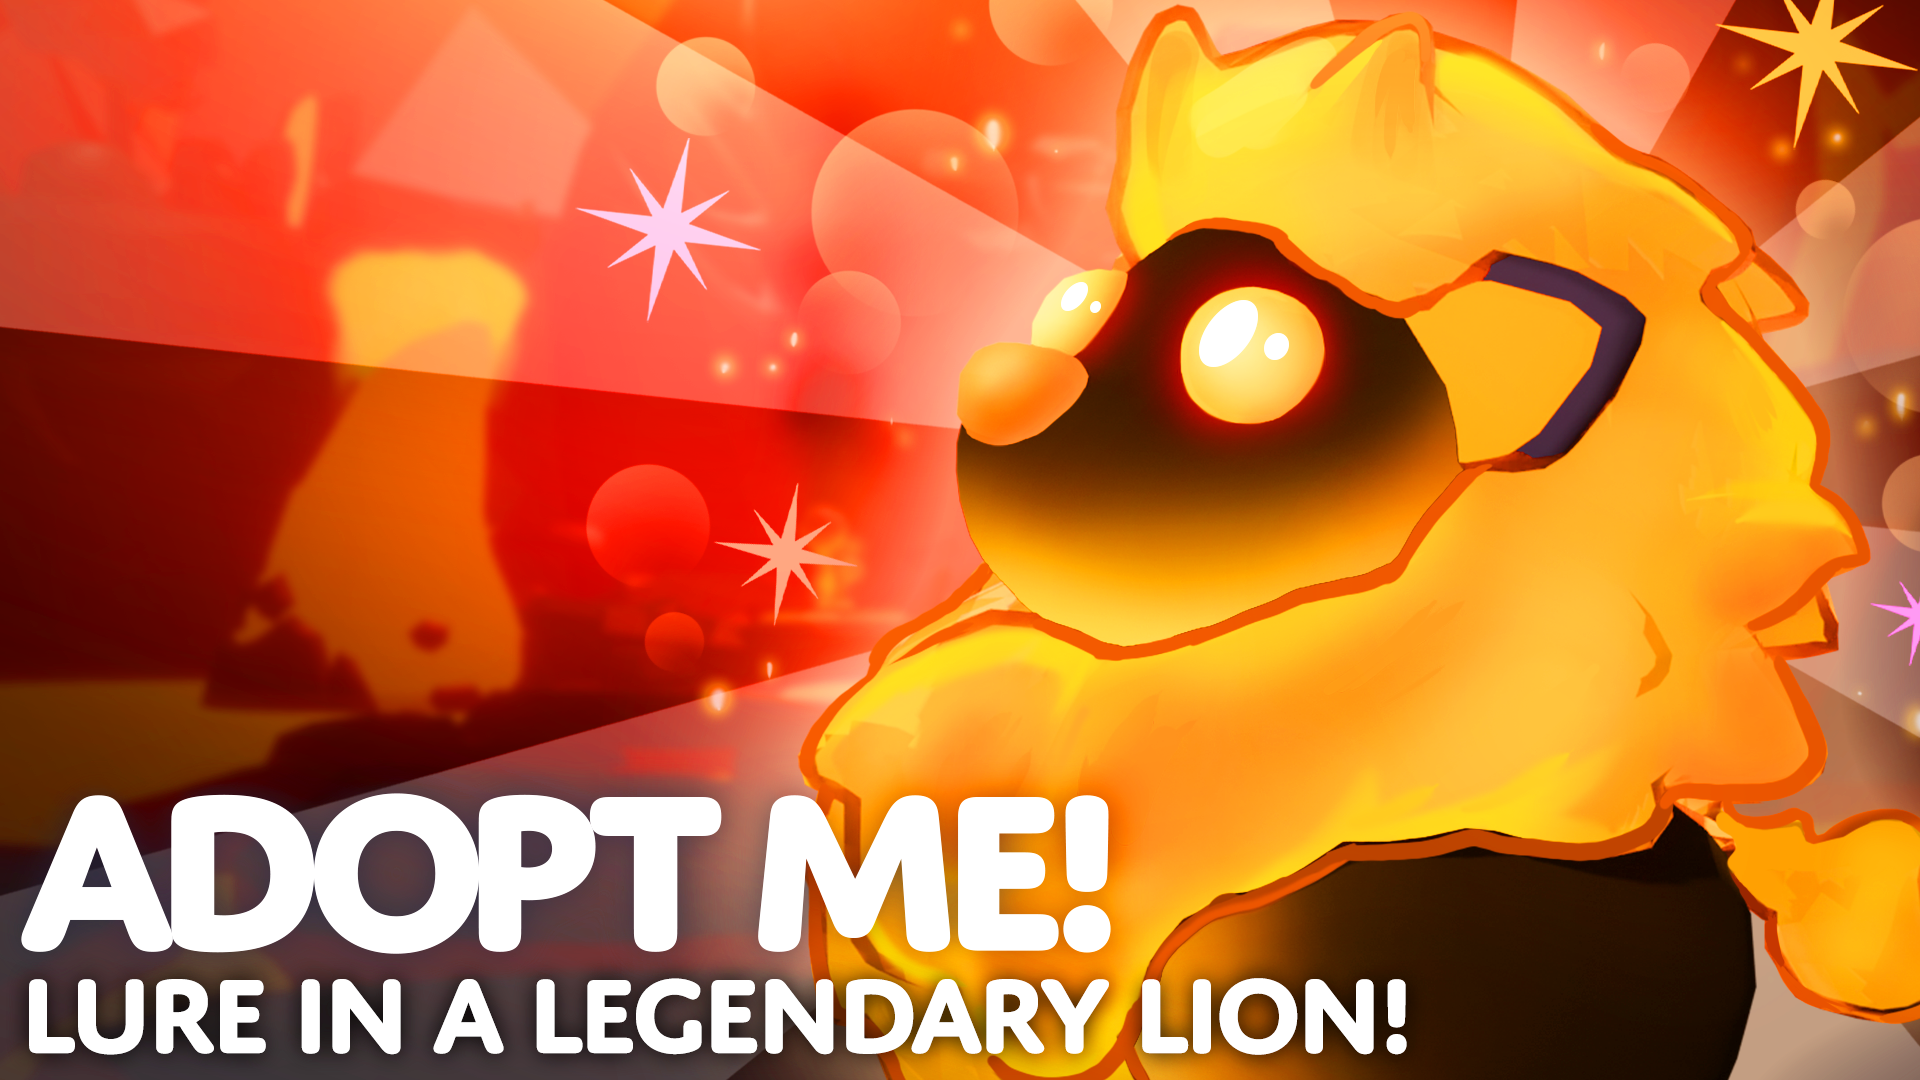 Legendary Blazing Lion welcomes you to the Lures update in Adopt Me! Their fur covered in flaming ember and the cutest little nose you can imagine. 